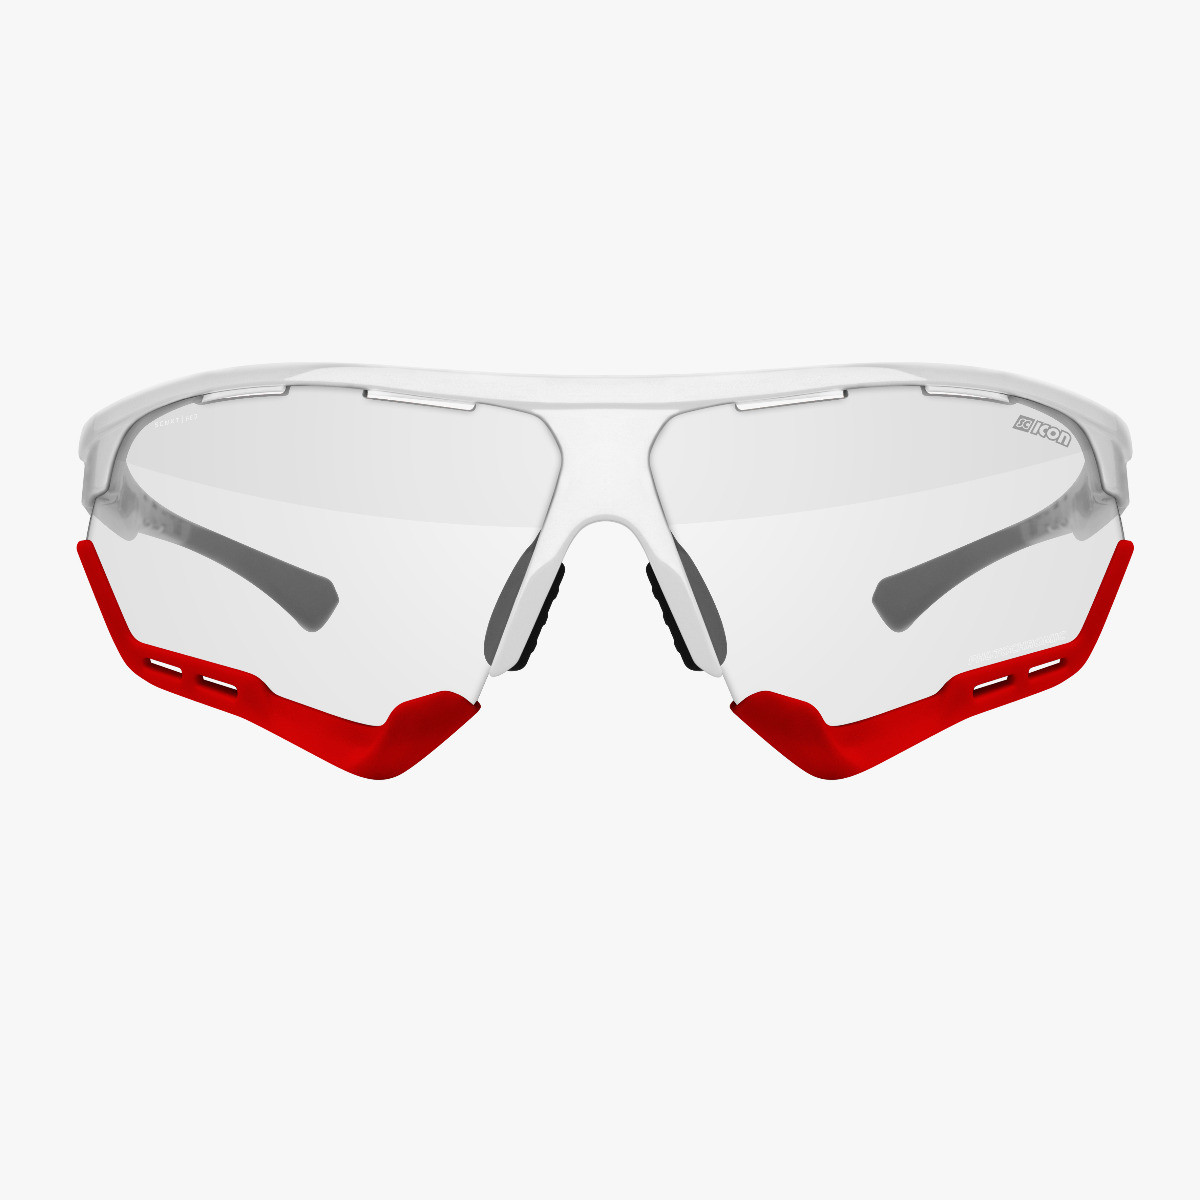 Aerocomfort cycling sunglasses scnxt photochromic white frame red lenses EY19160403
